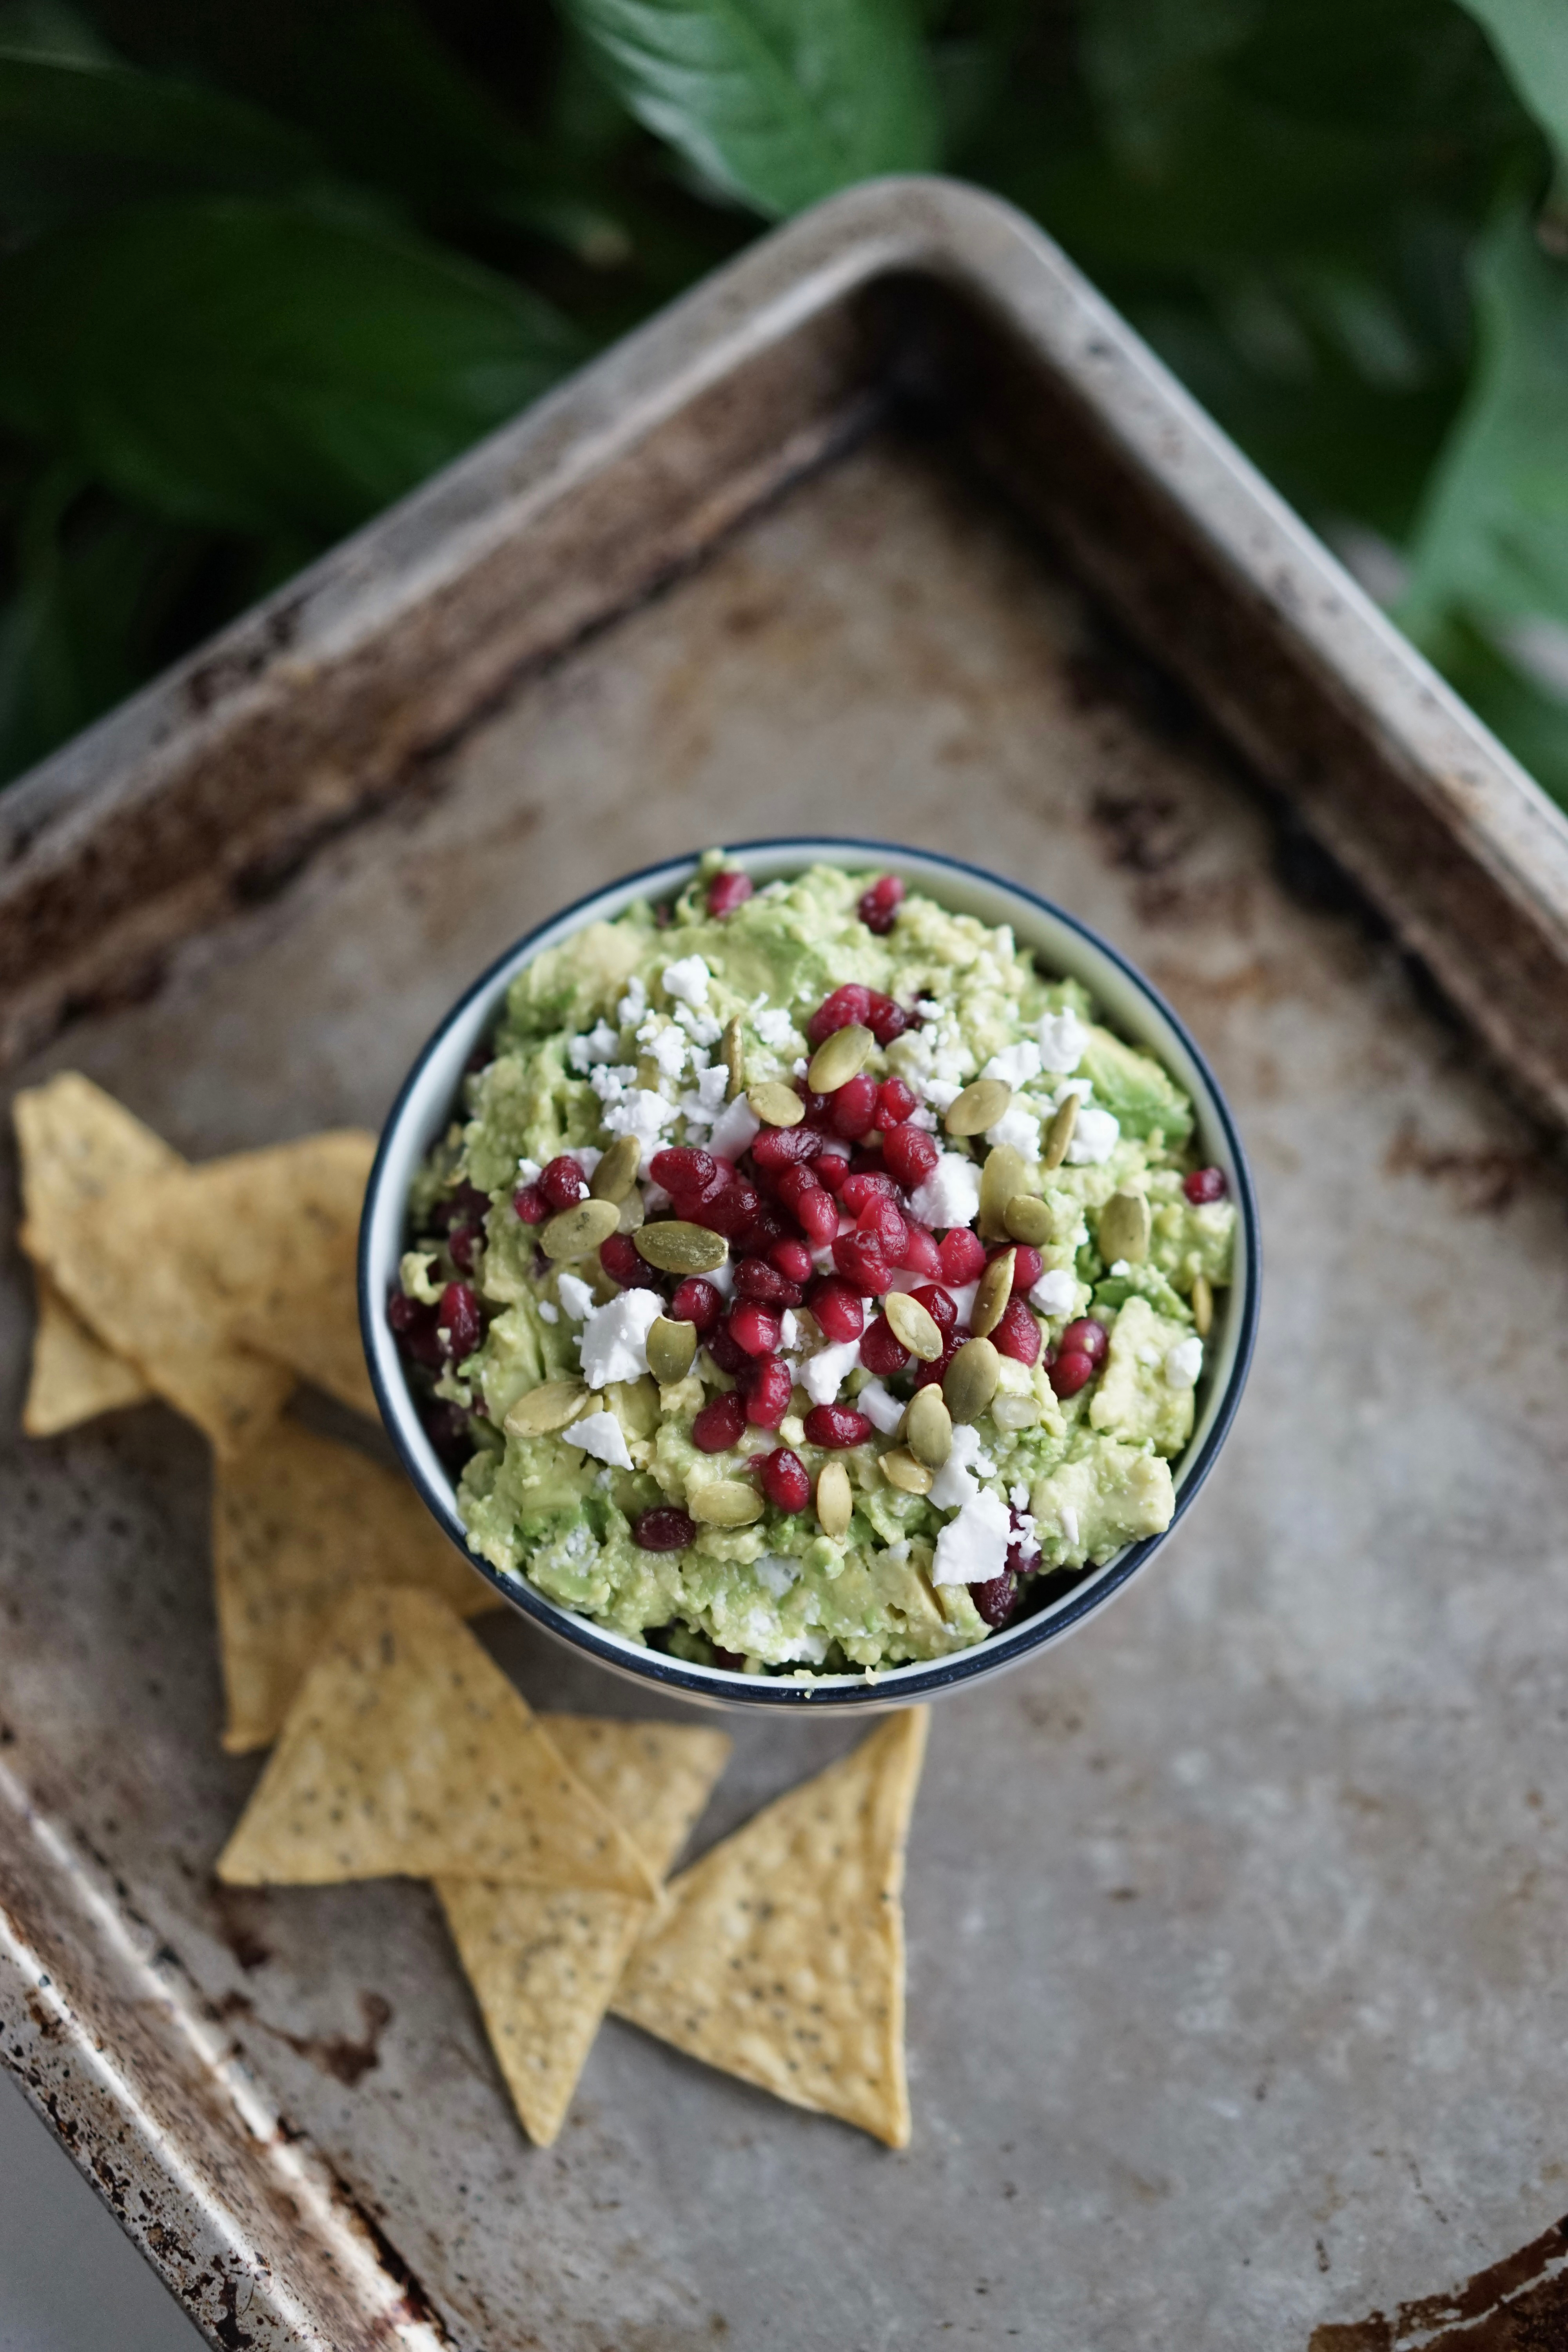 Pomegranate Avocado Dip | Living Healthy in Seattle